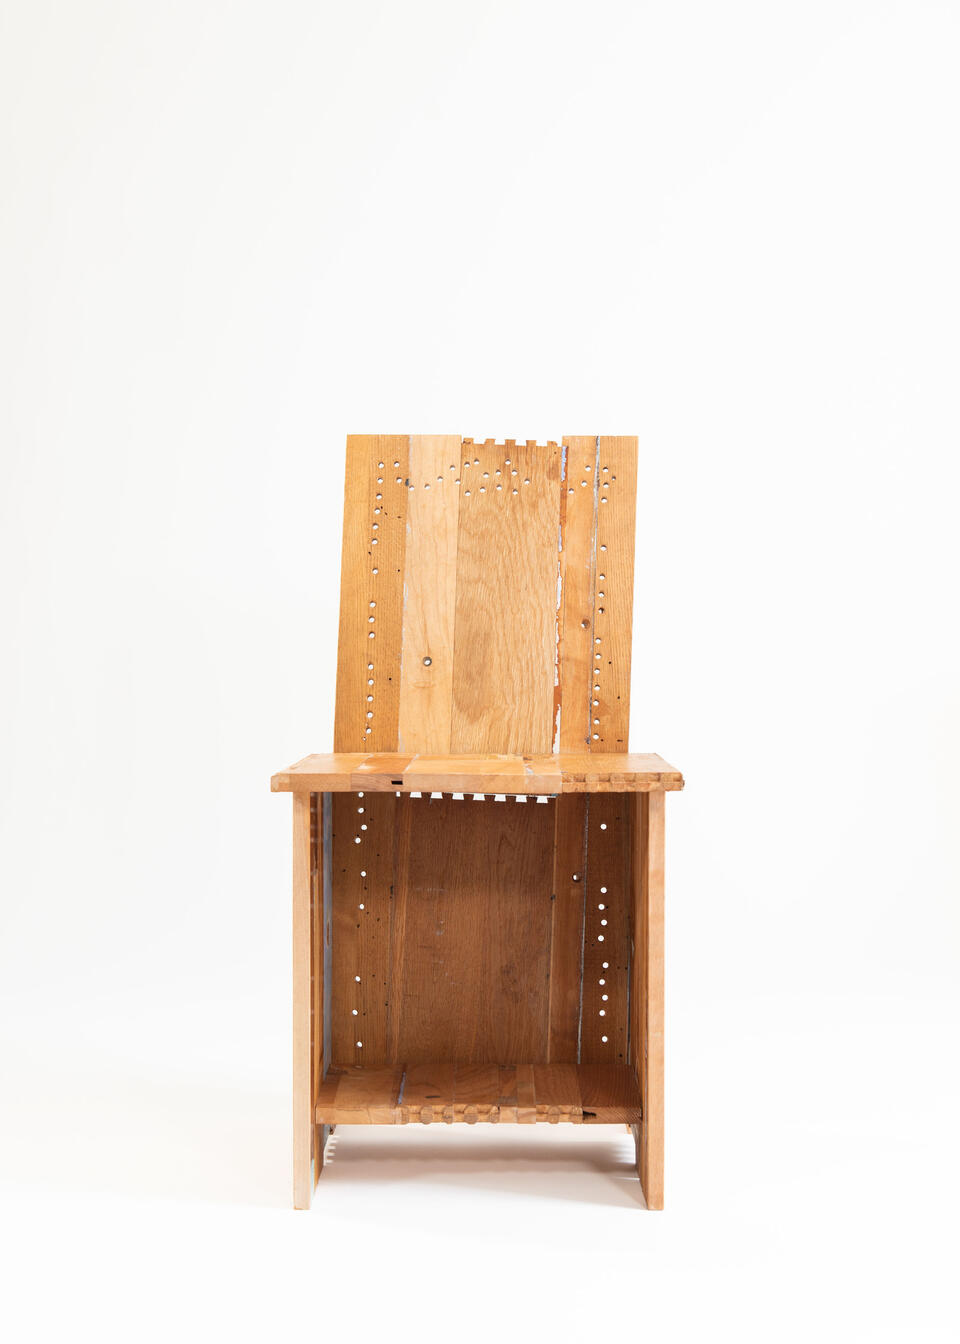 A chair made from the deconstructed materials of a found dresser painted in multiple colors.